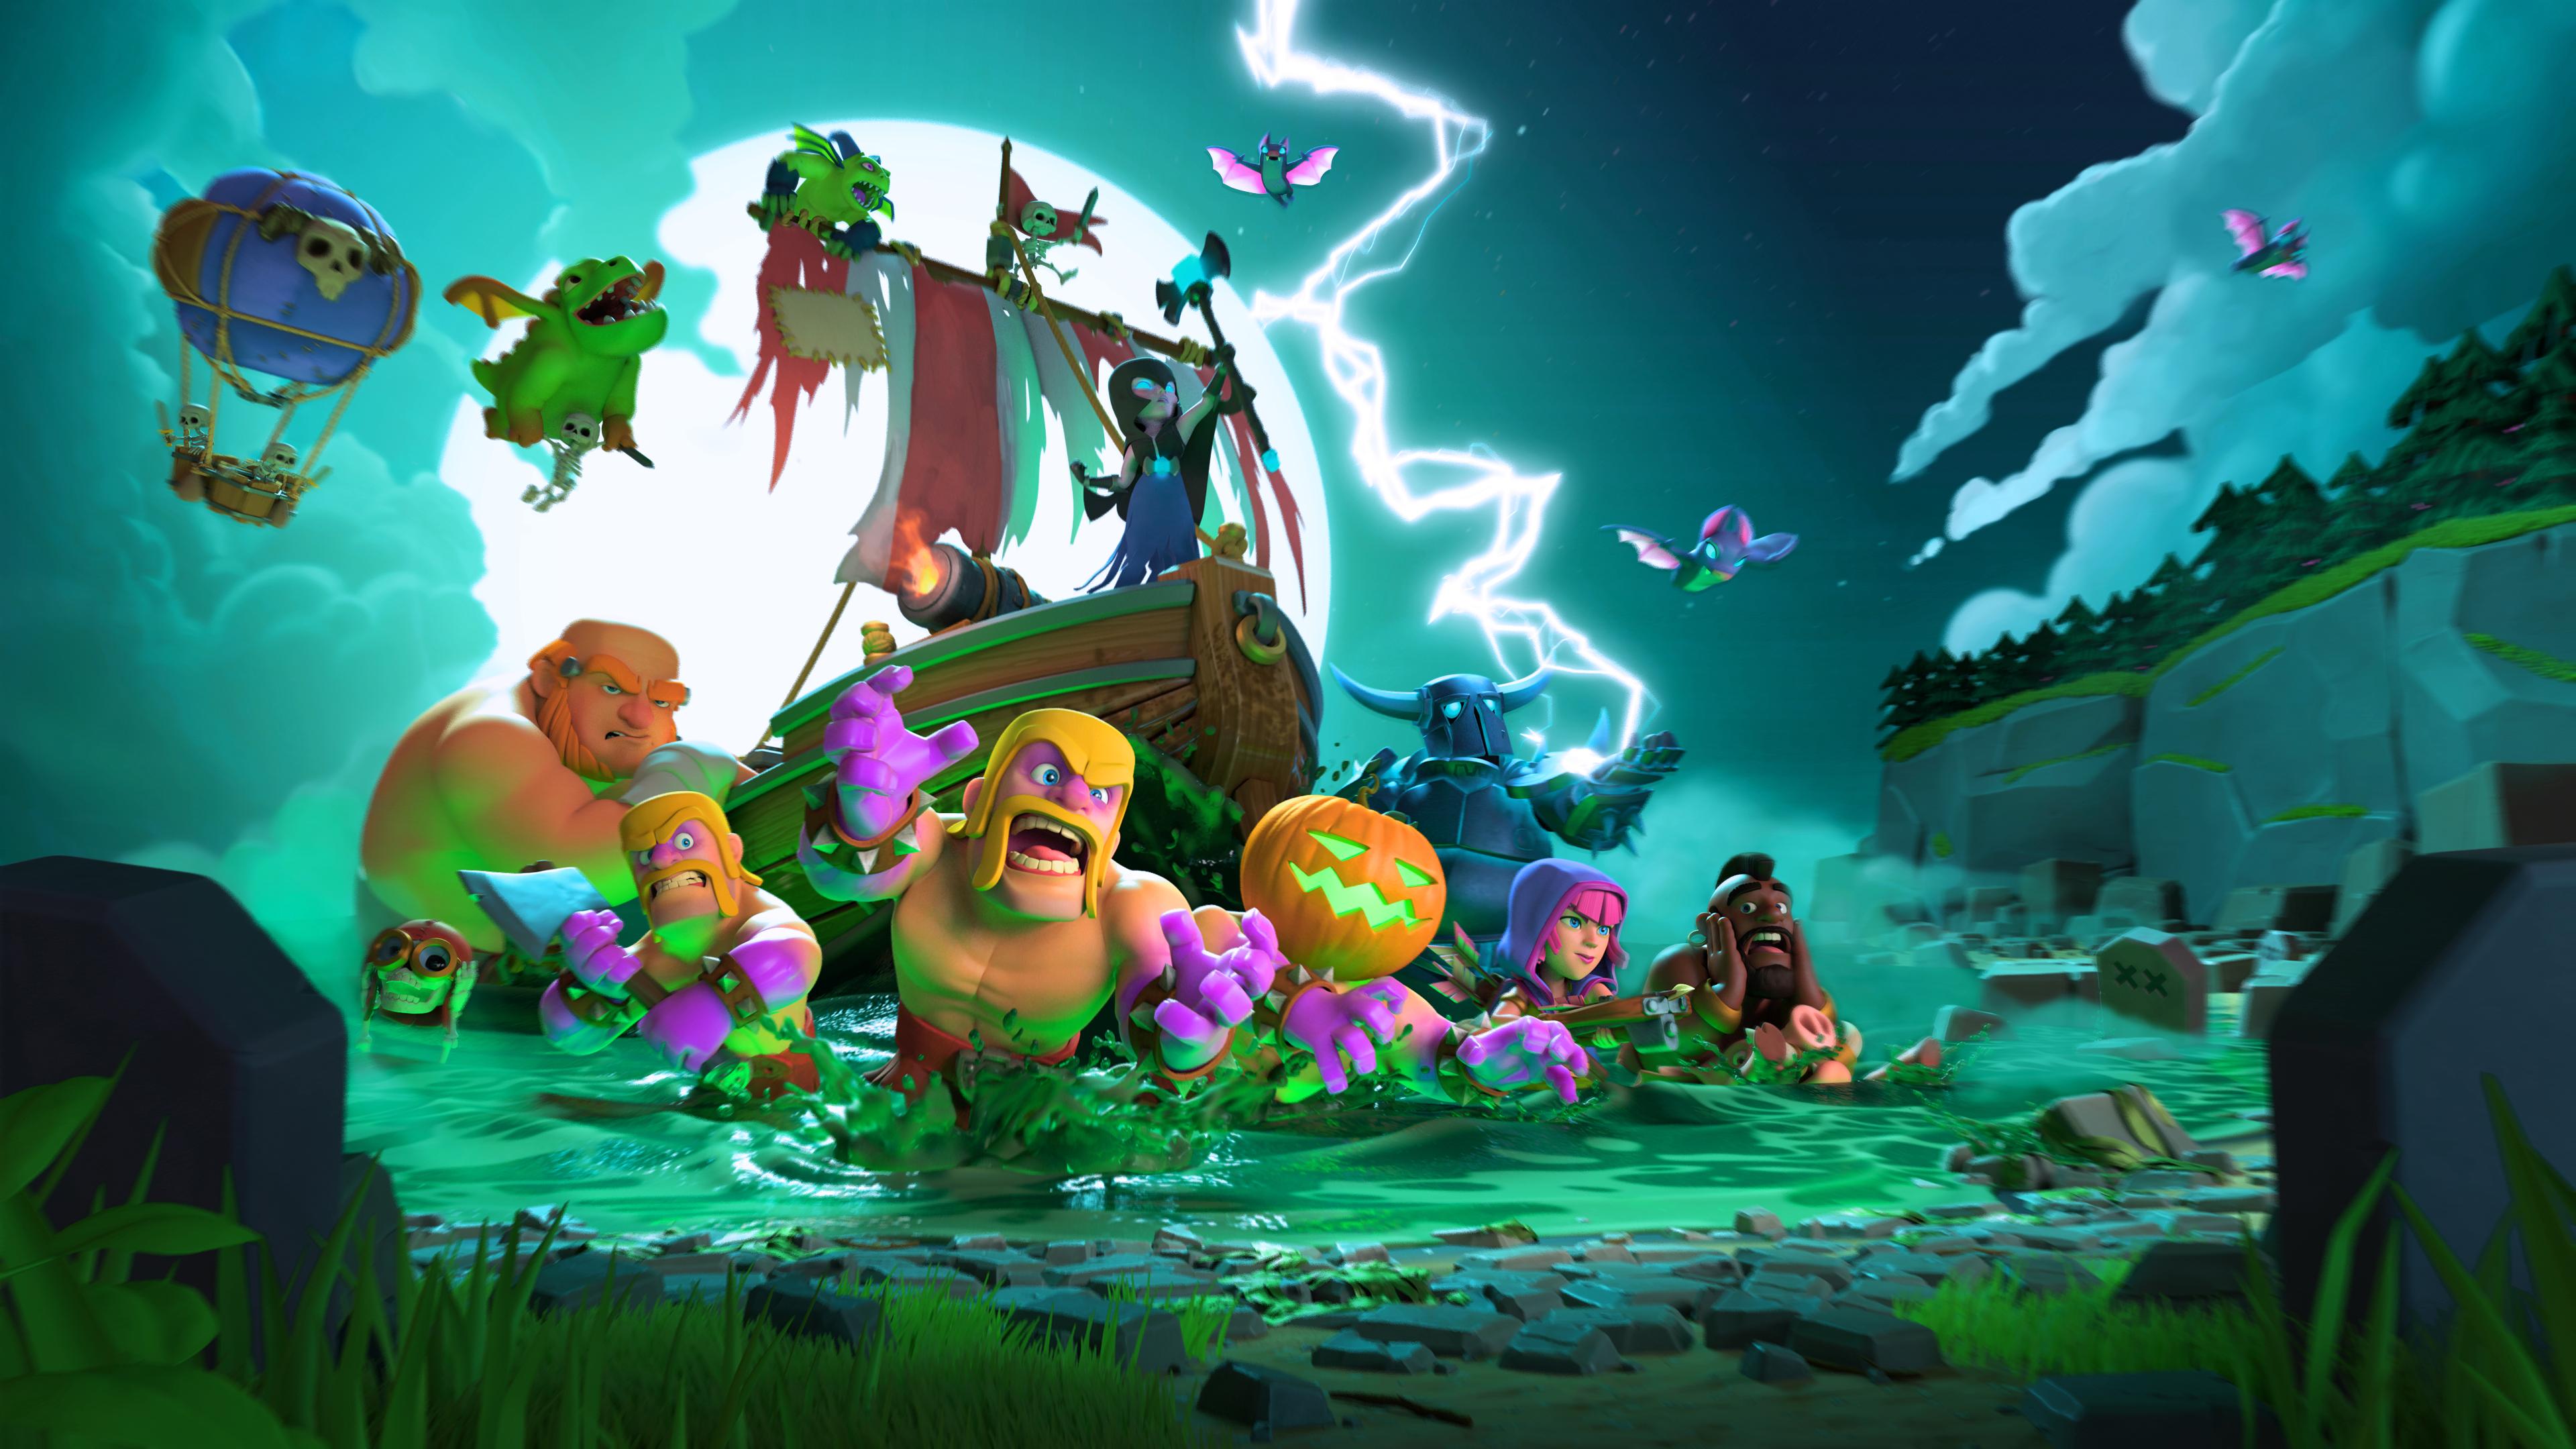 clash of clans wallpaper hd,action adventure game,adventure game,animated cartoon,illustration,pc game